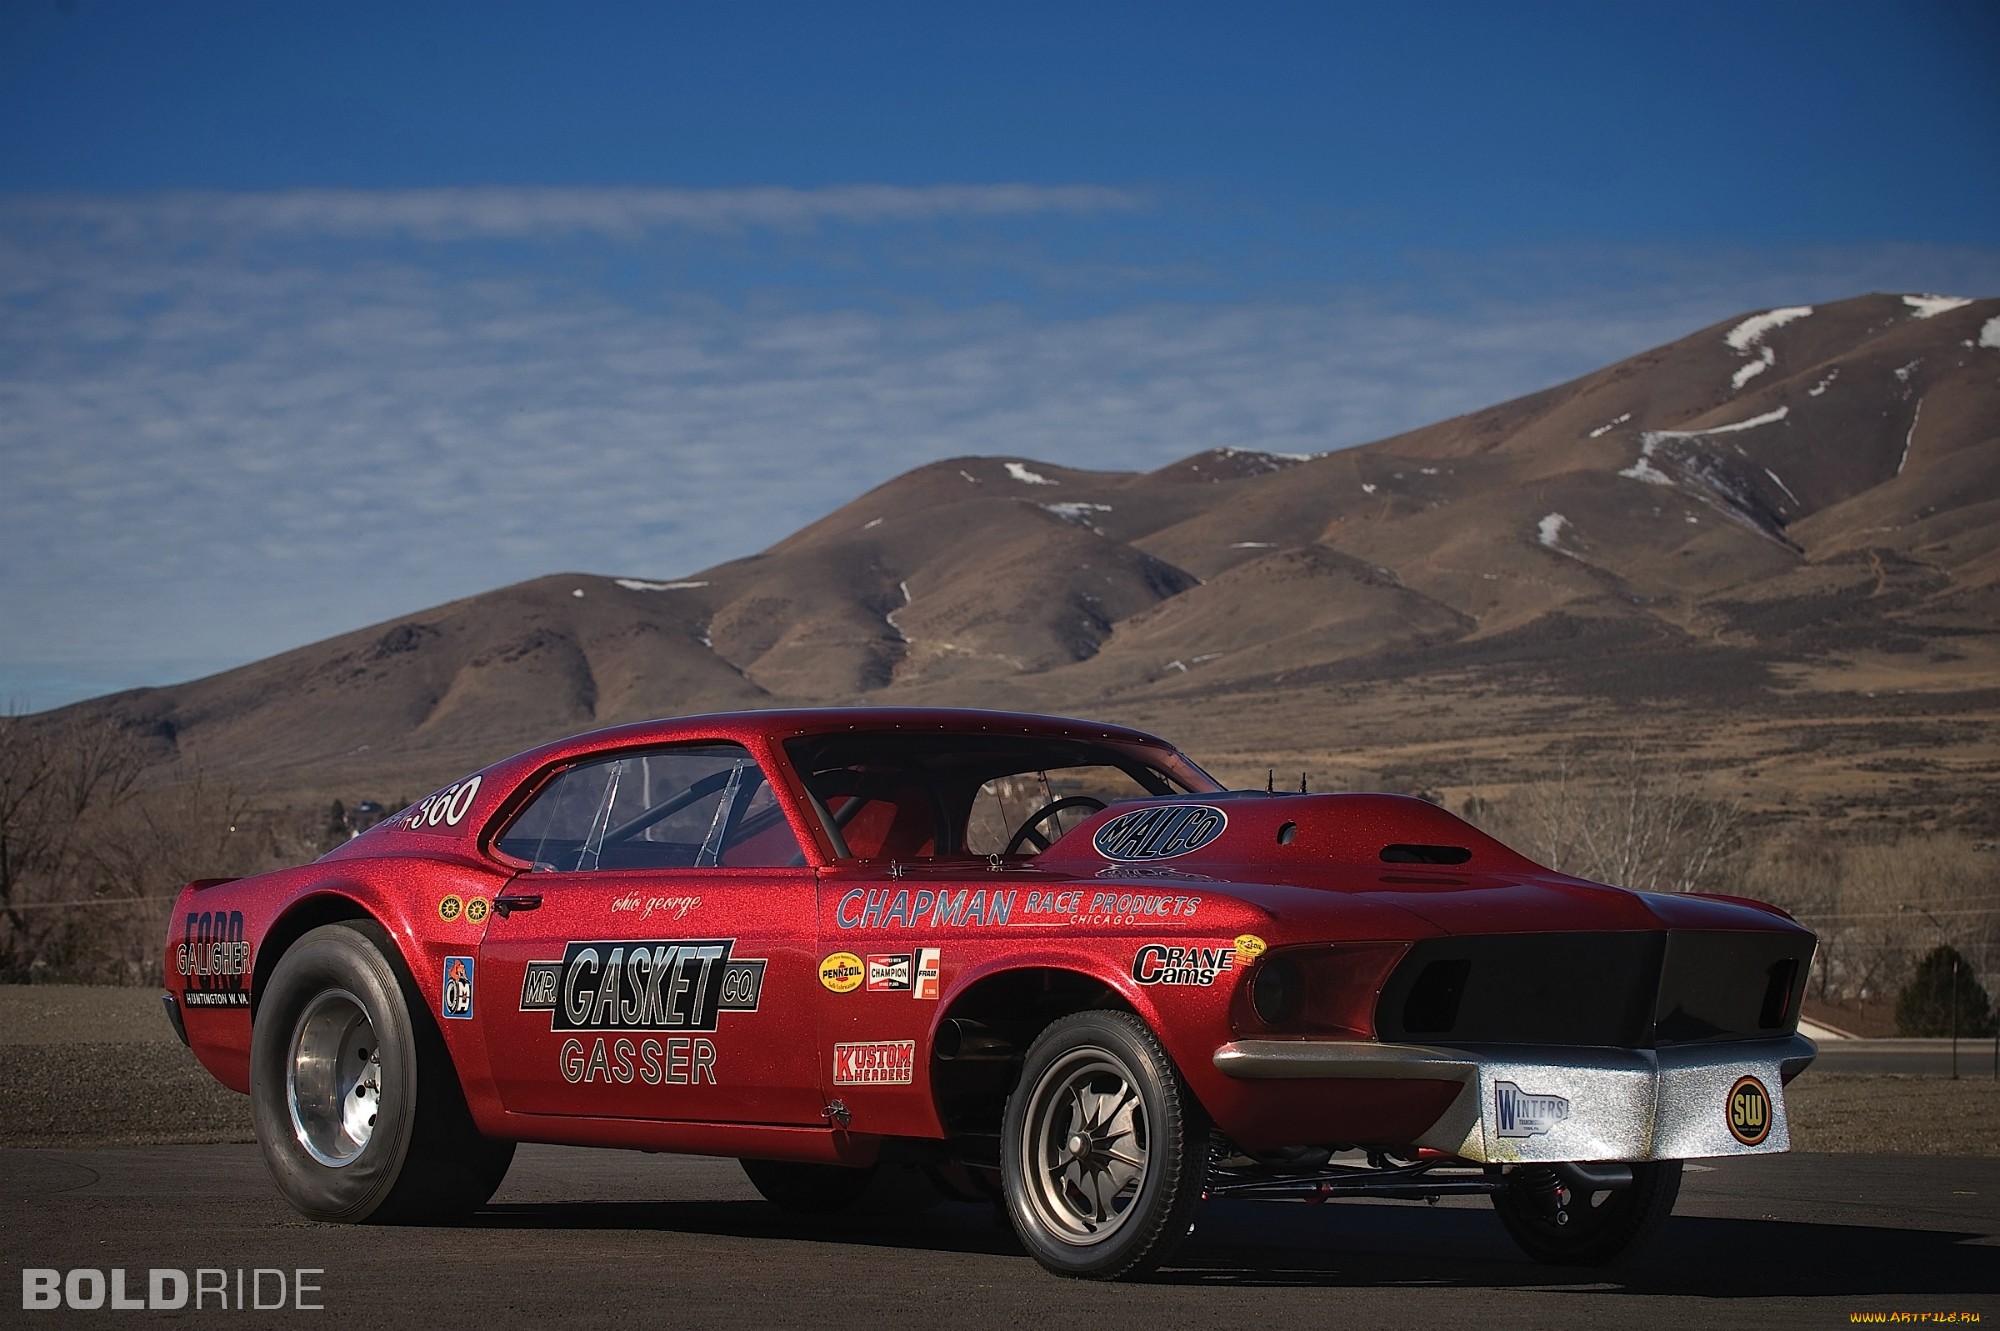 ford, Mustang mr gasket, Gasser, Drag, Racing, Muscle, Cars, Hot, Rod, Race Wallpaper